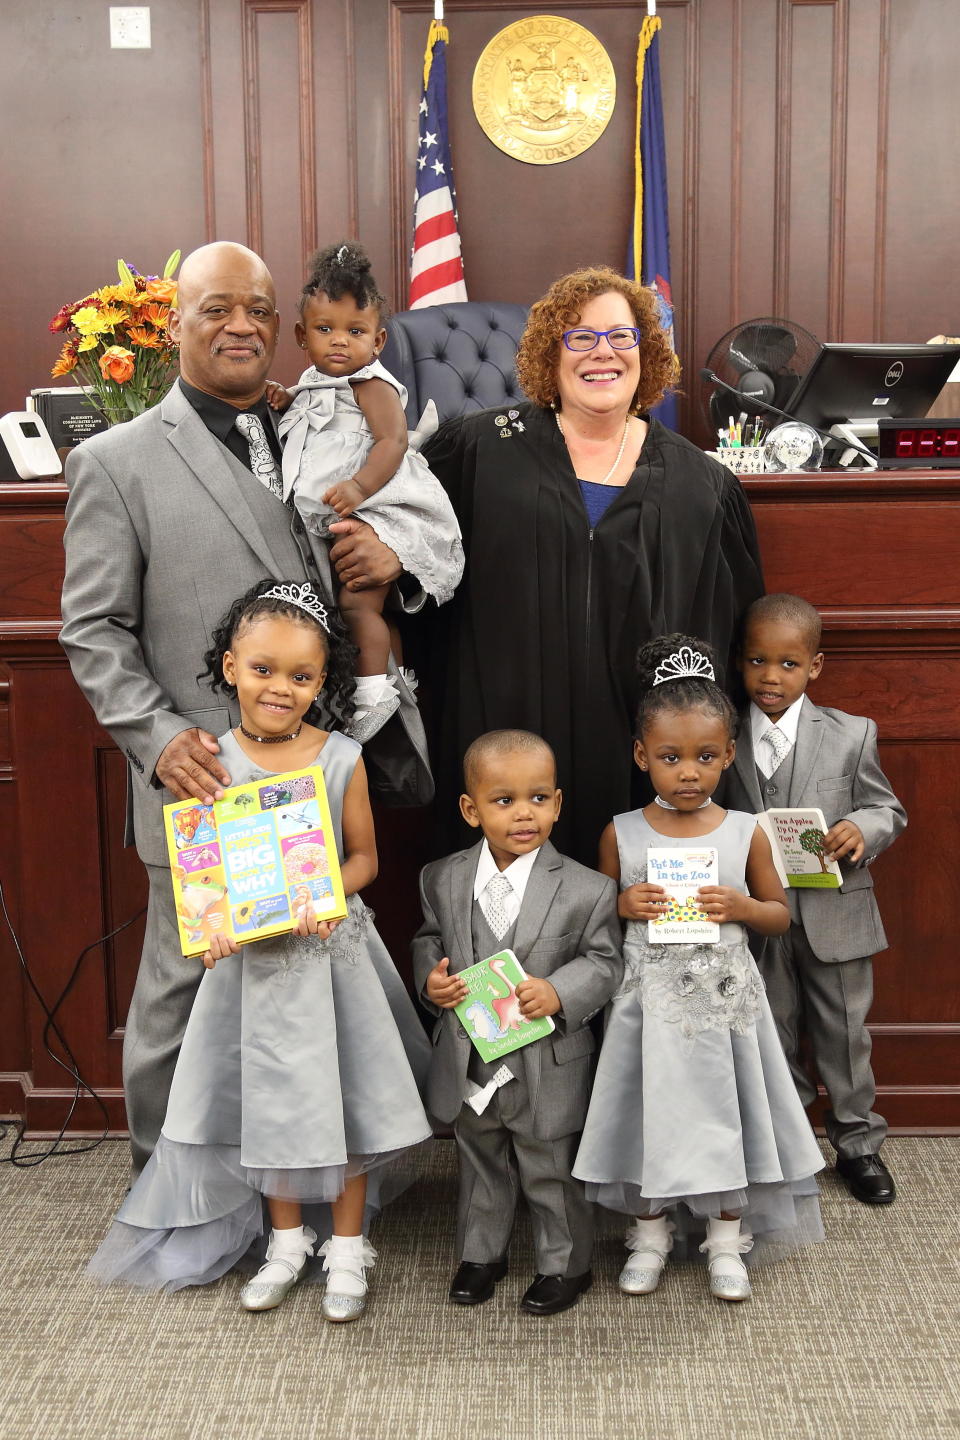 Lamont Thomas adopted five siblings so they could all stay together. / Credit: Anna Miller